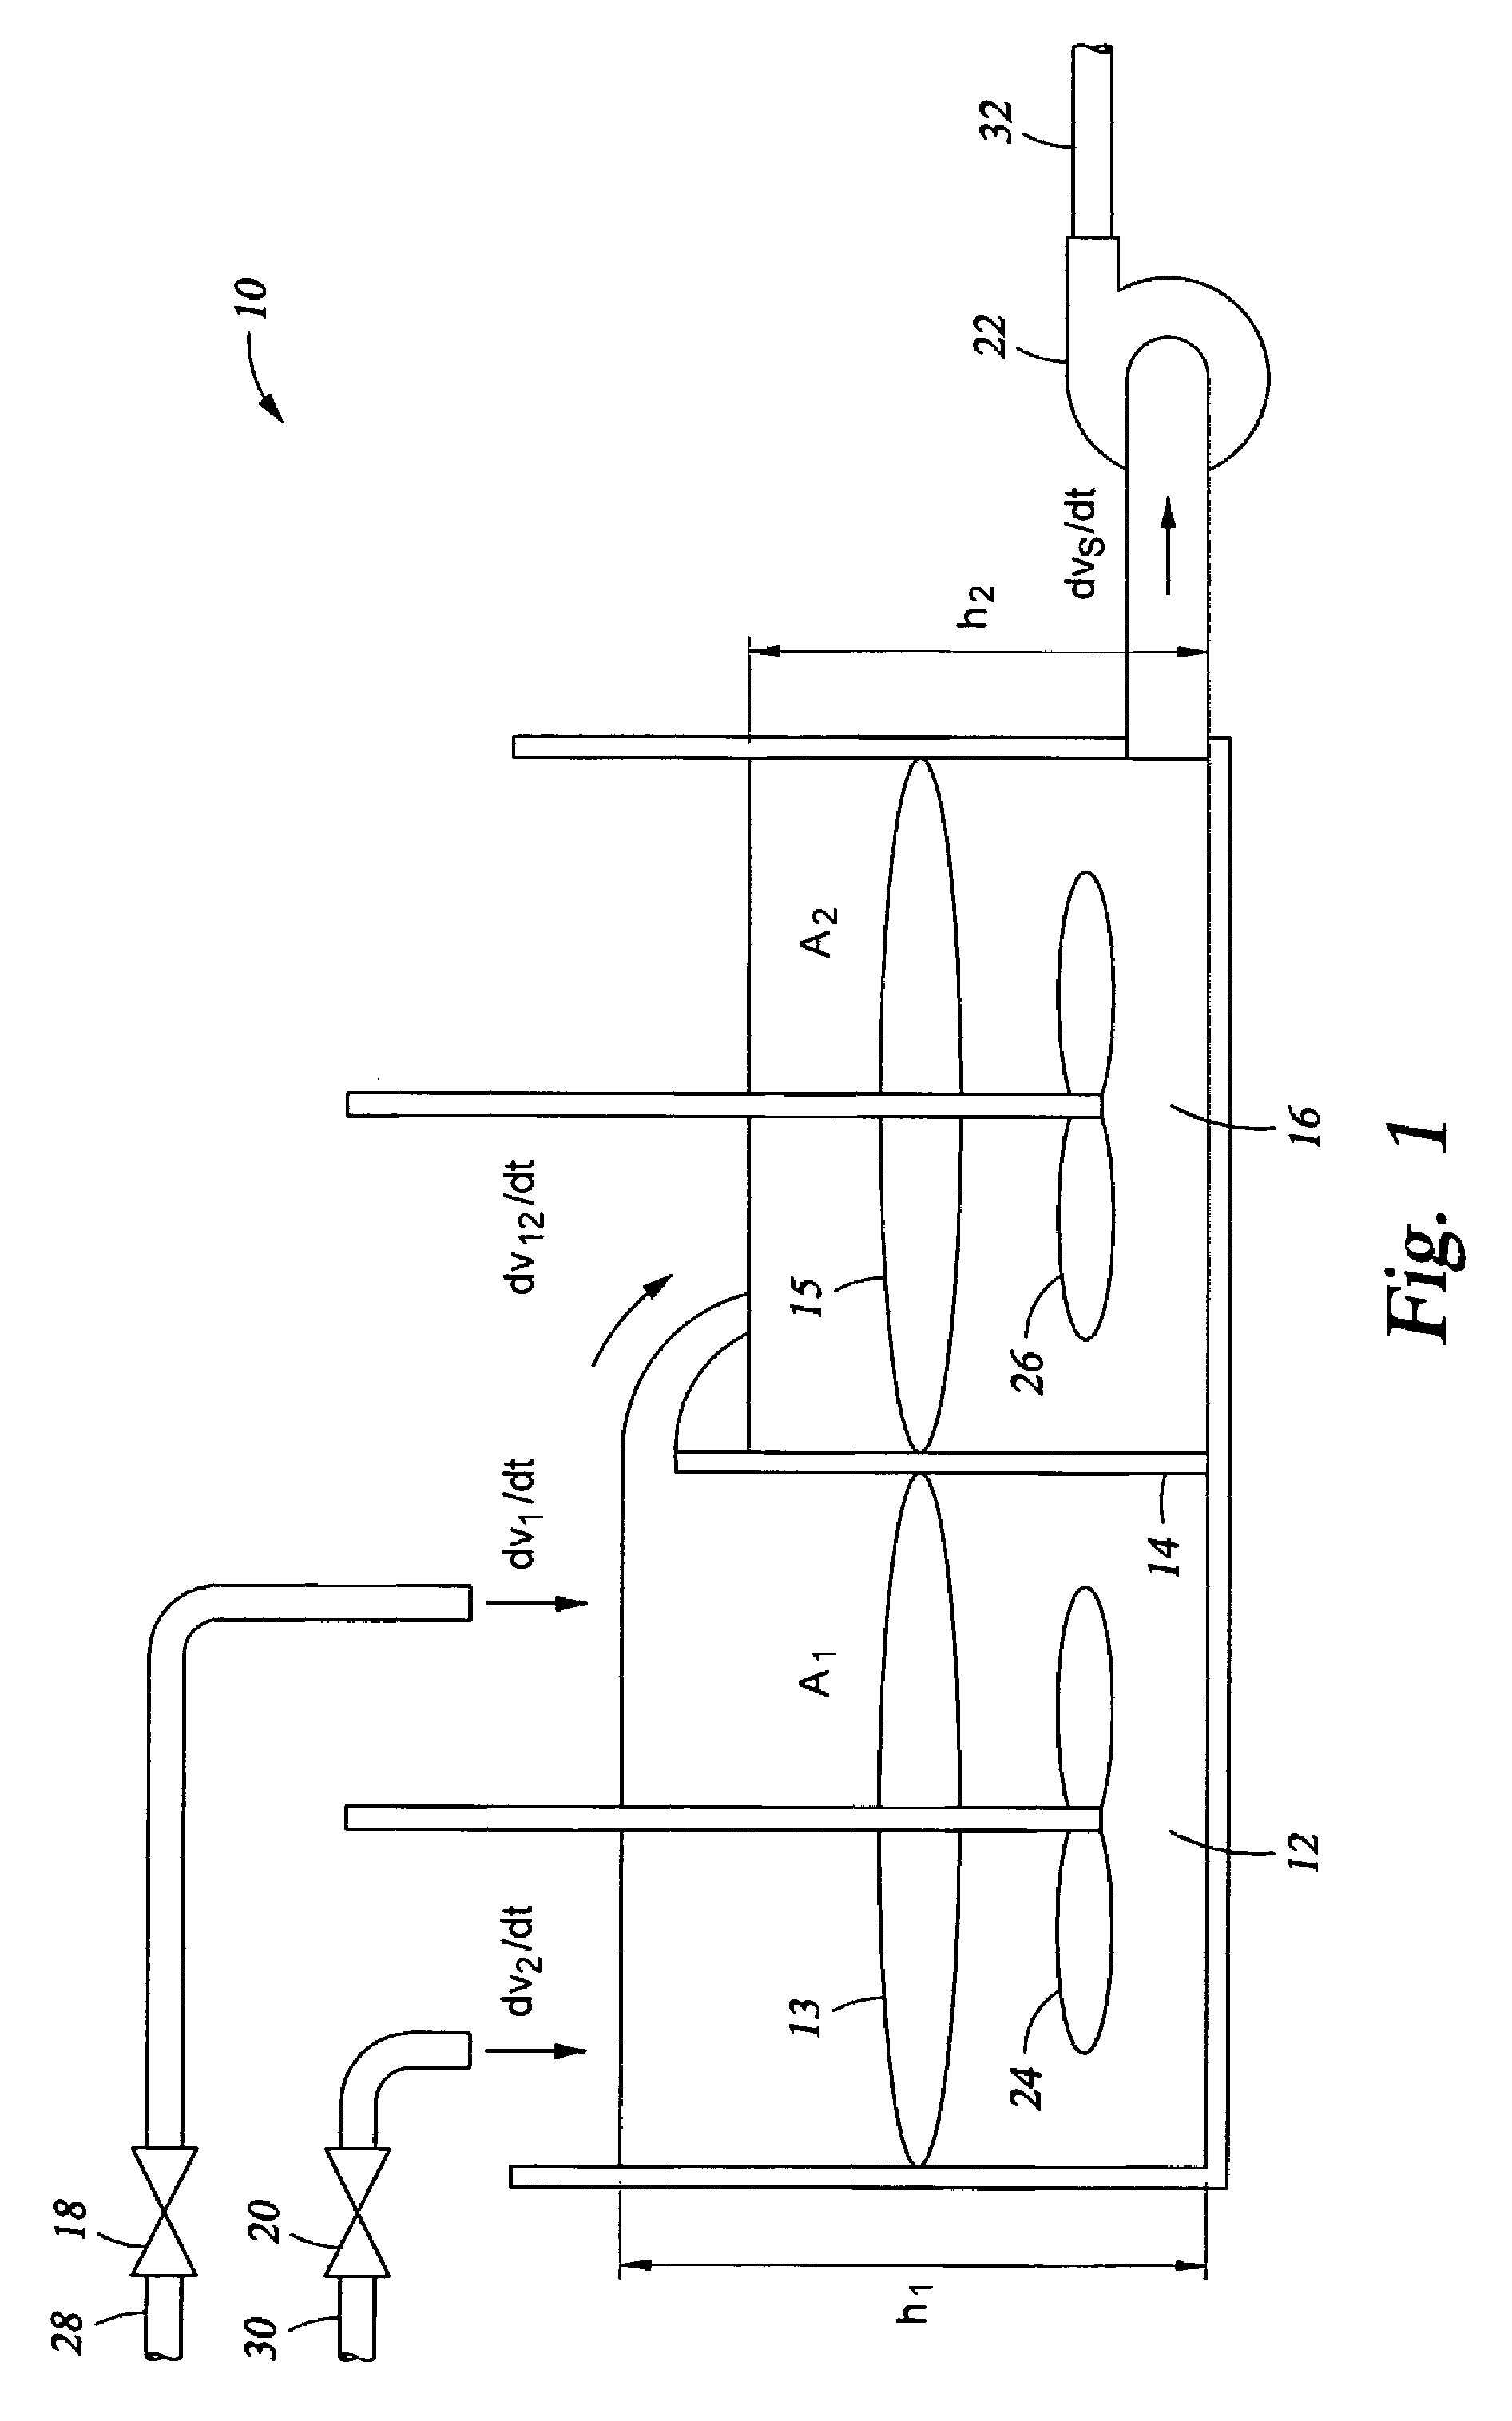 Control system design for a mixing system with multiple inputs